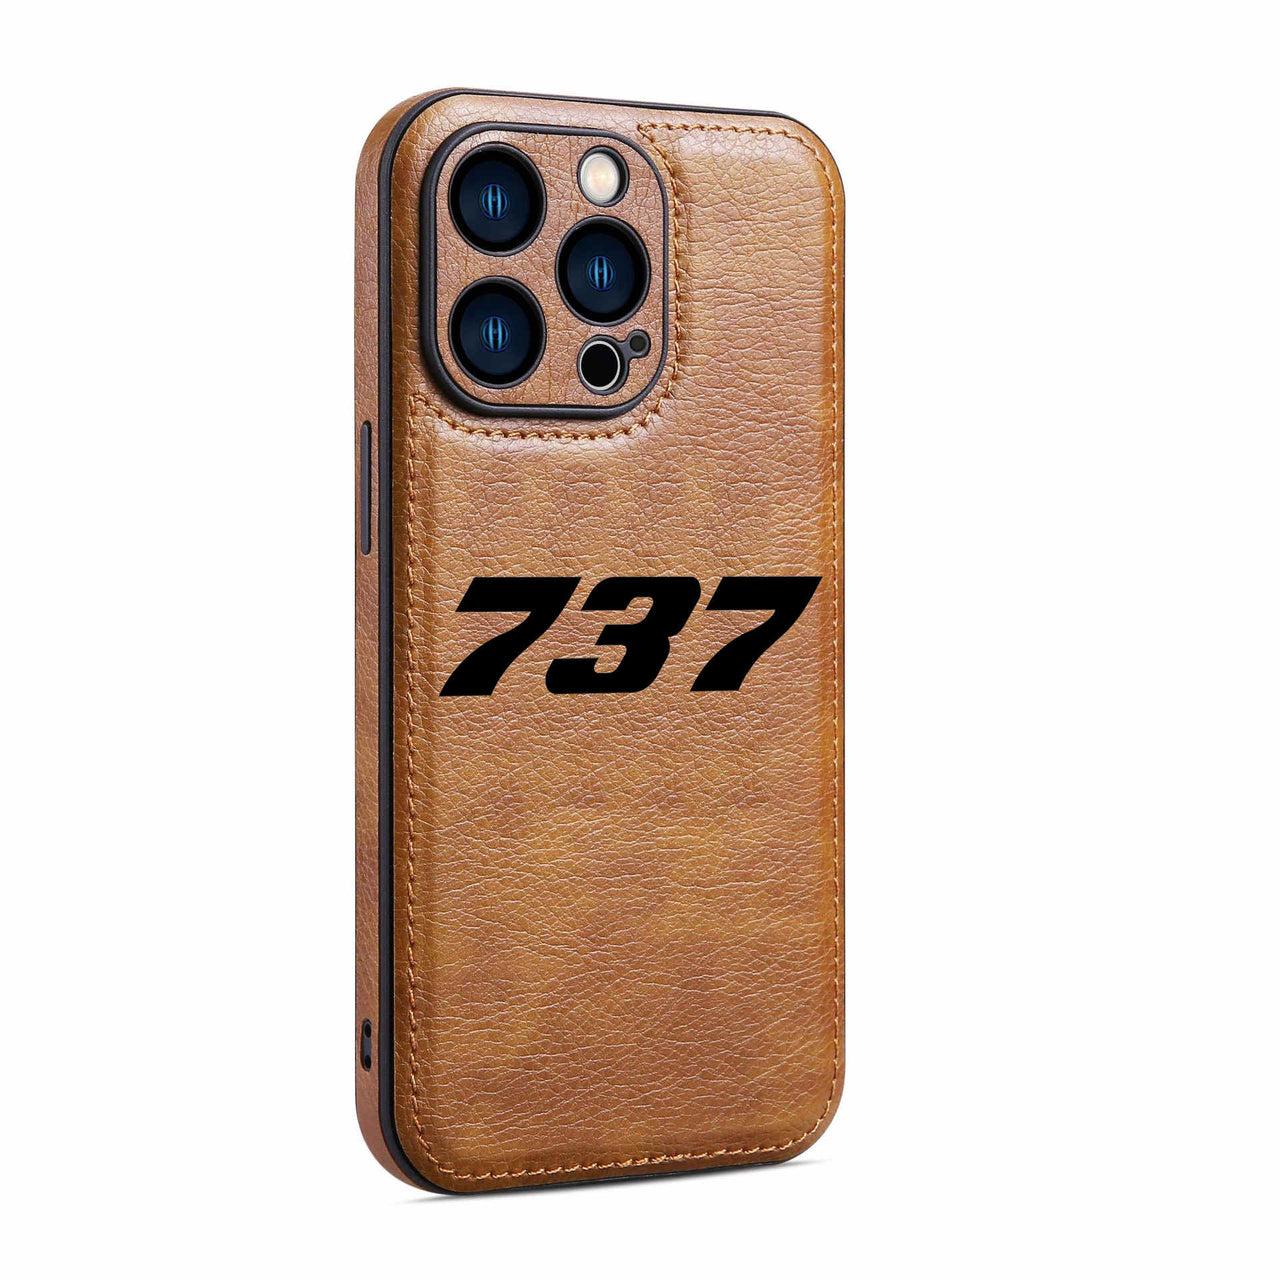 737 Flat Text Designed Leather iPhone Cases